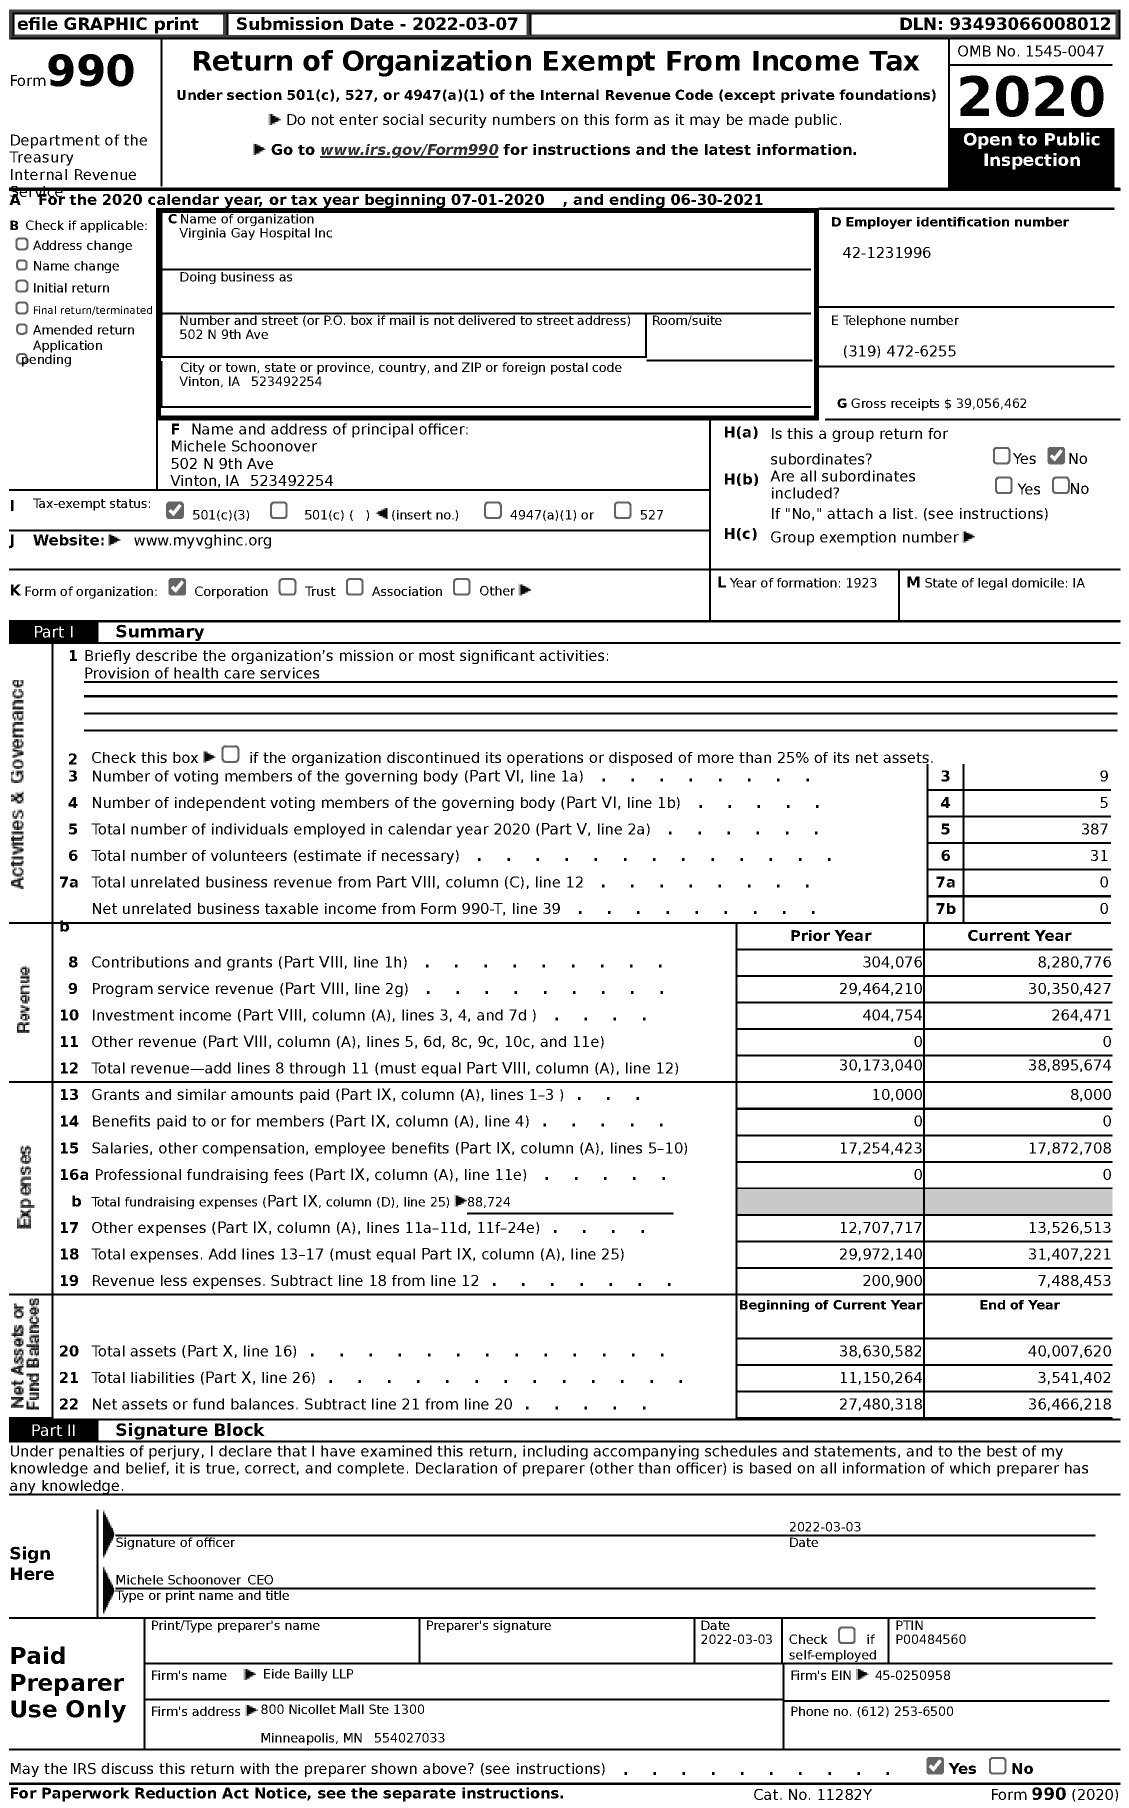 Image of first page of 2020 Form 990 for Virginia Gay Hospital (VGH)